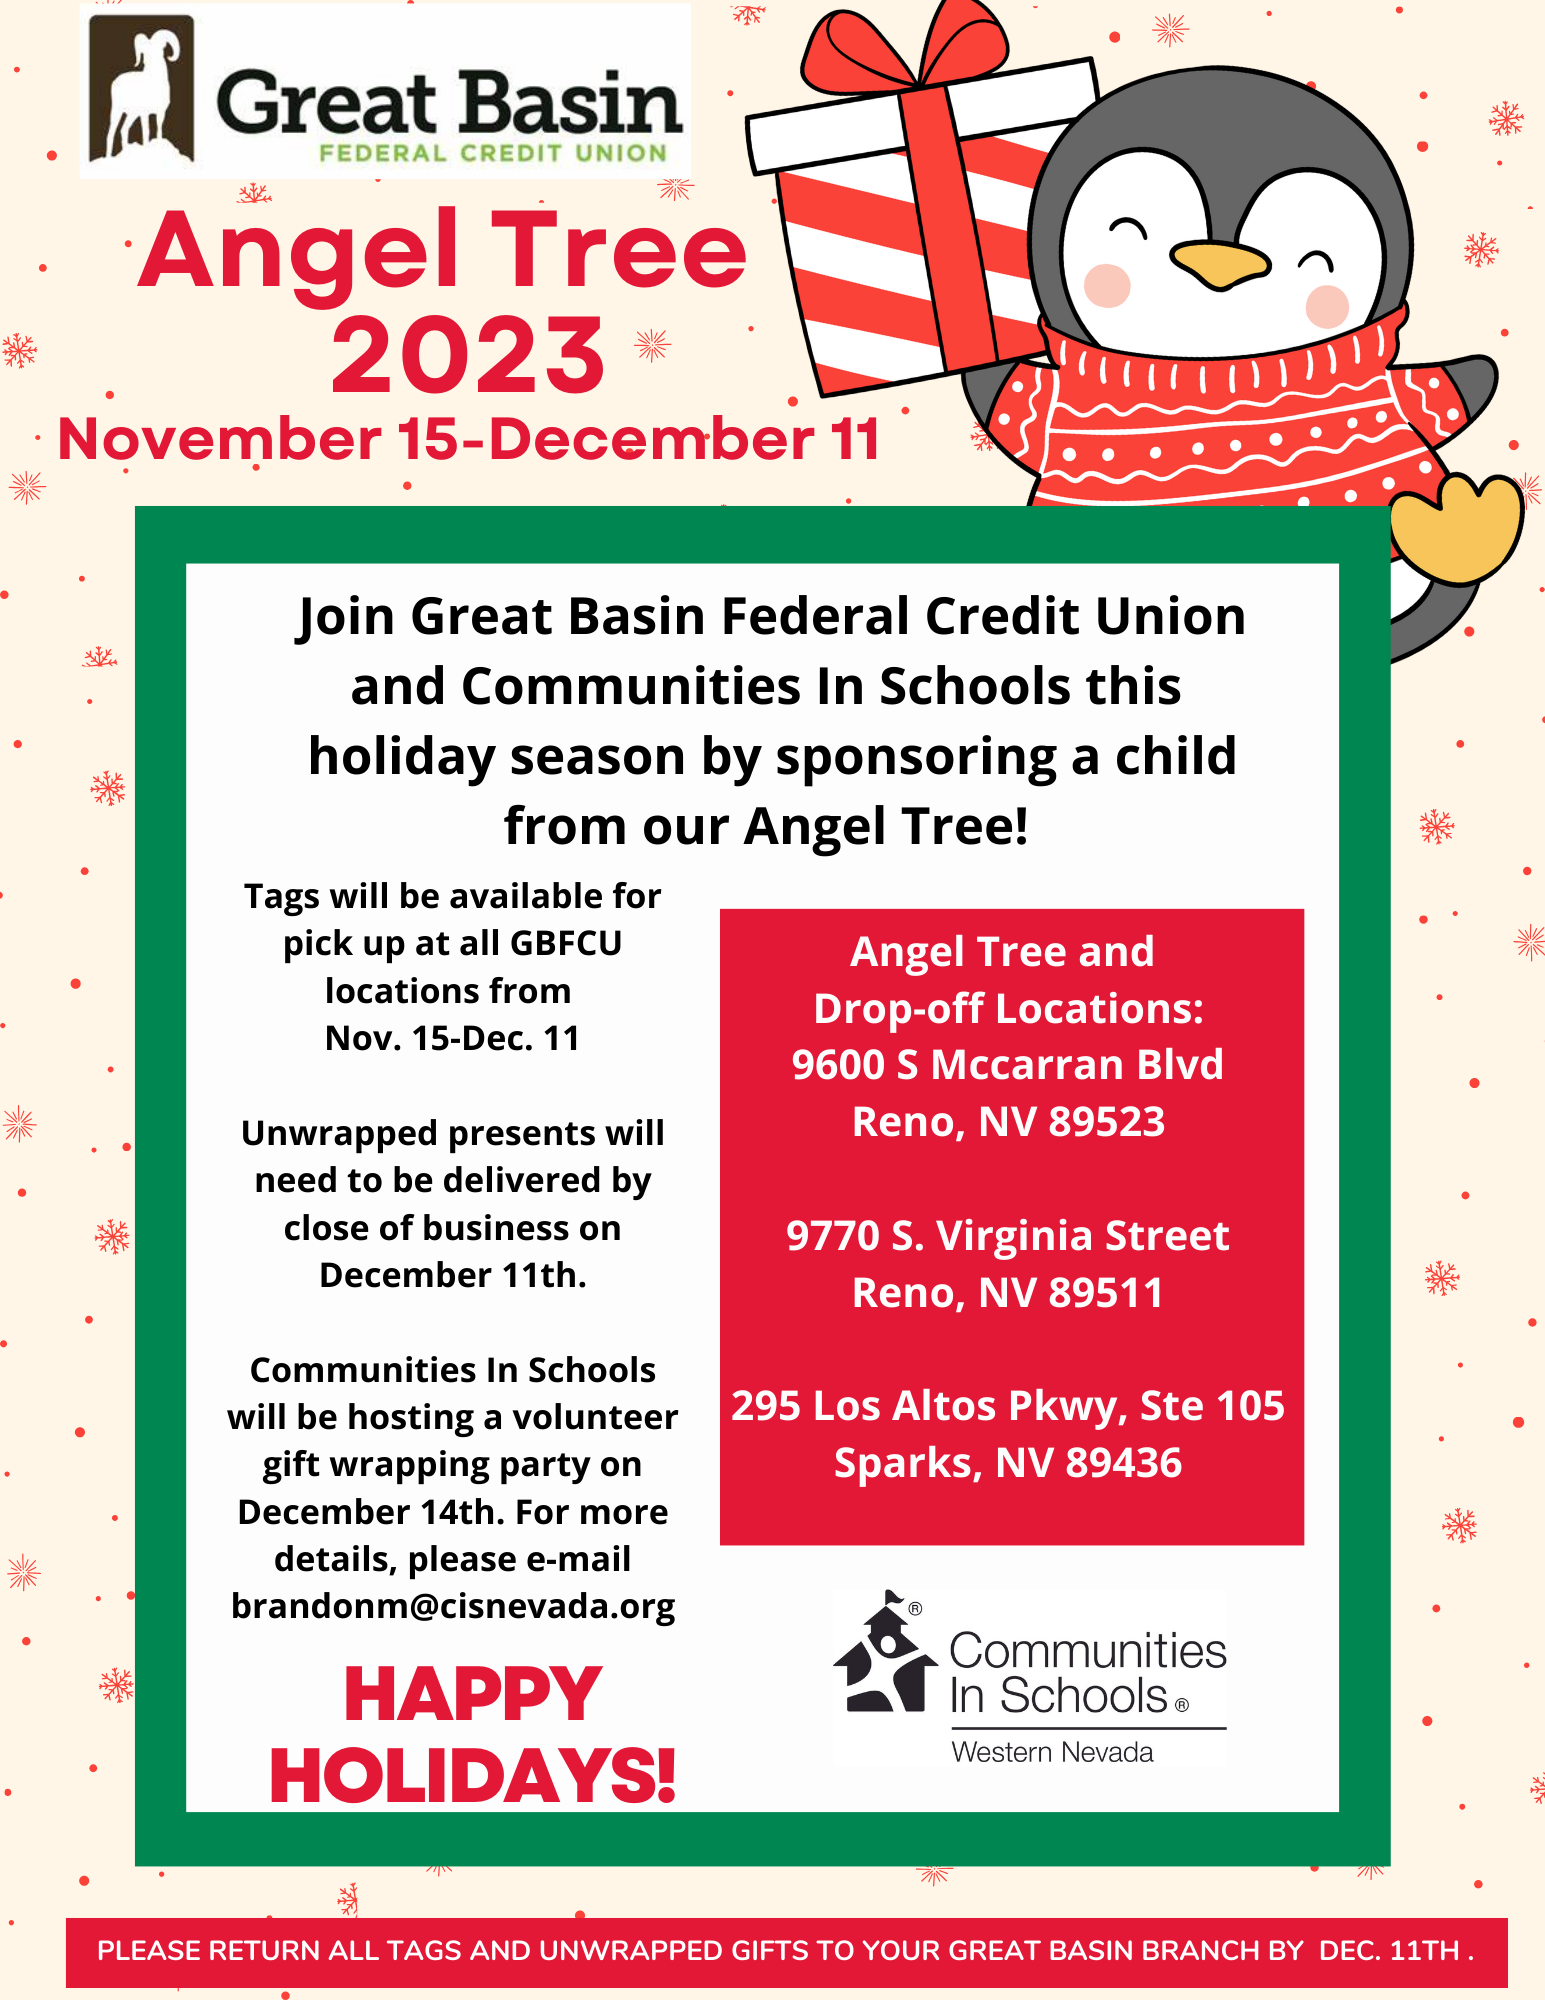 Angel Tree is presented by Great Basin Federal Credit Union and Communities In Schools. Give back this holiday season by sponsoring a child from our Angel Tree! 